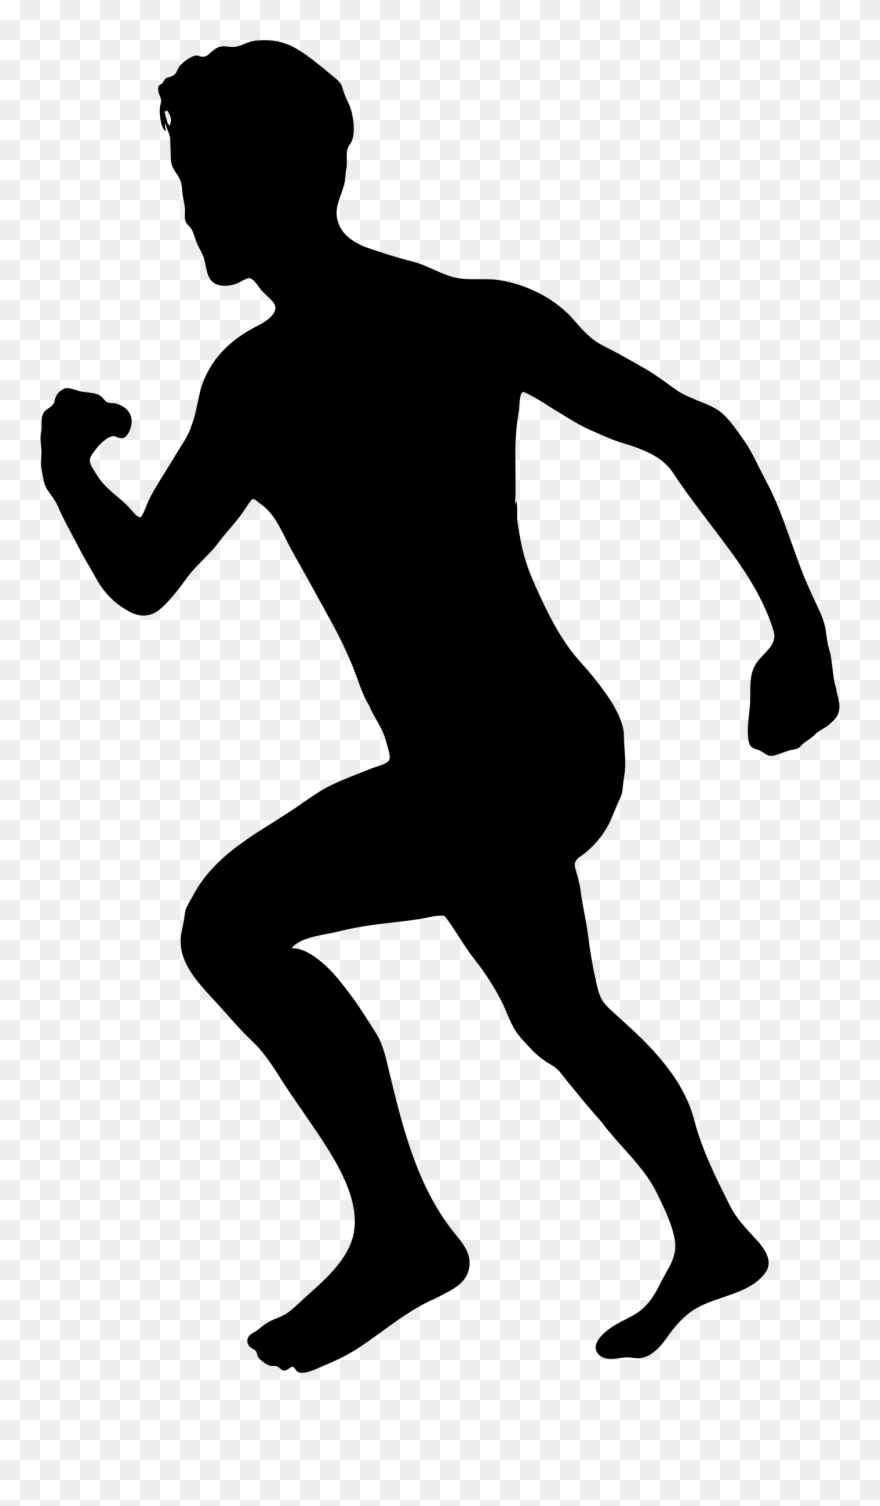 Free Clip Art Of Person Running Clipart The.